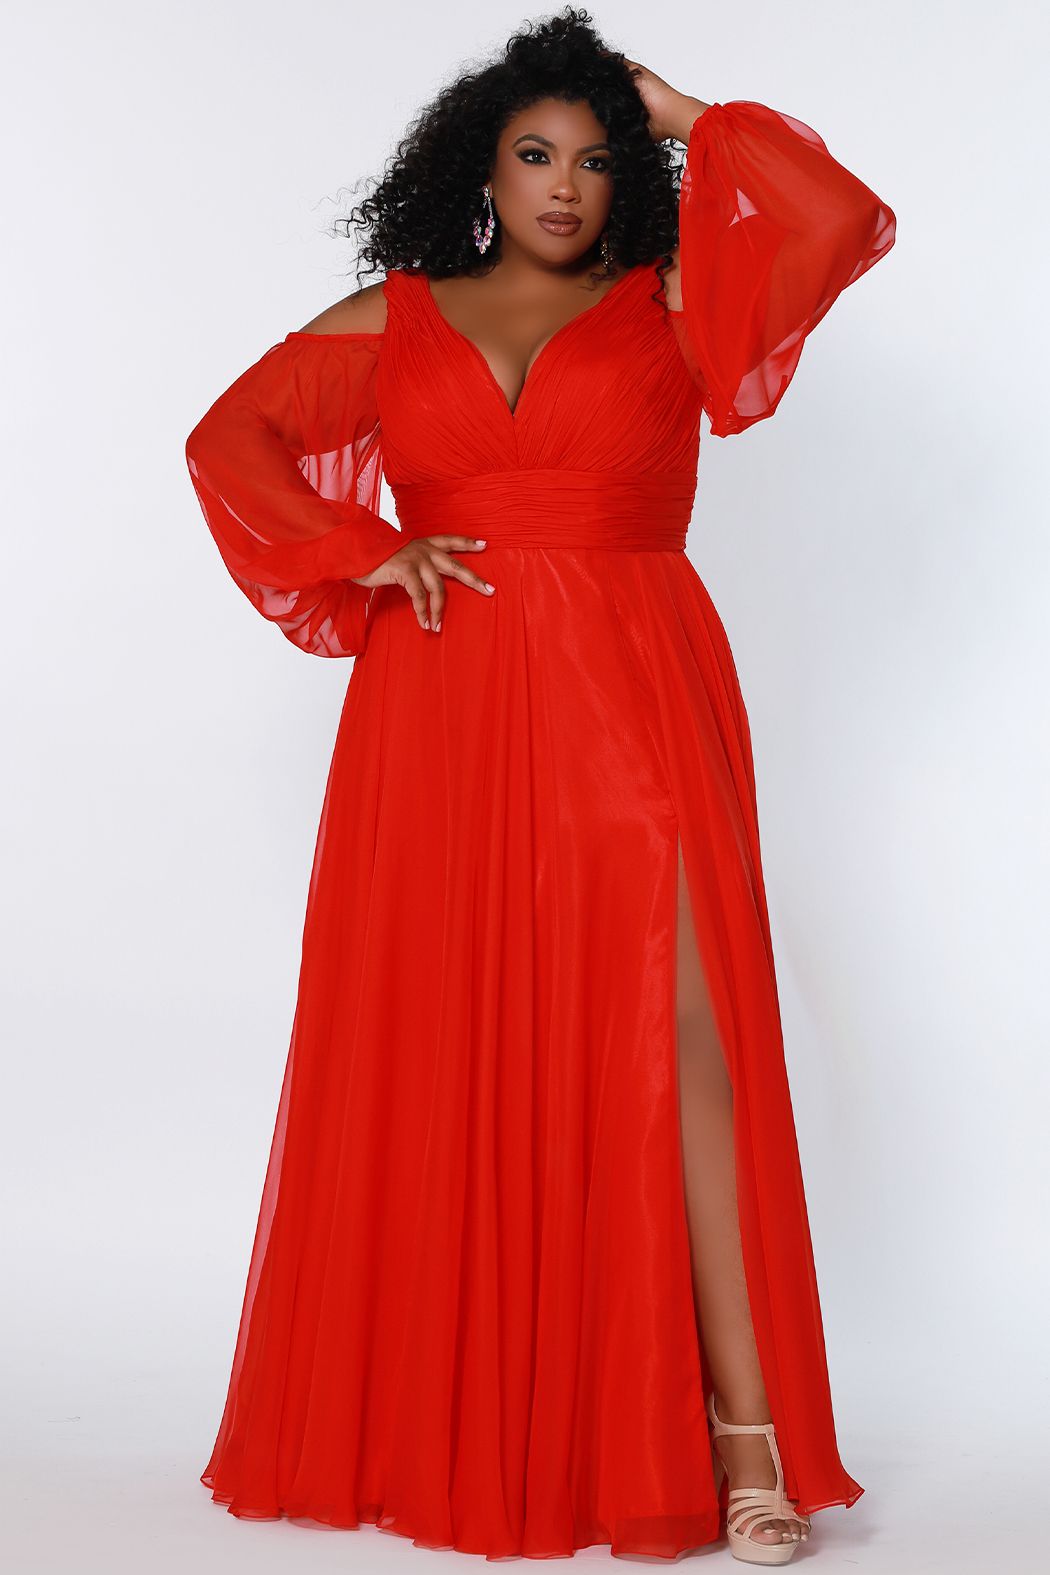 Johnathan Kayne for Sydney's Closet JK2205 A-Line Poly Chiffon Cold Shoulder Long Pouf See-Thru Sleeves Plus Size Prom Dress. Make a fashion statement in the Johnathan Kayne for Sydney's Closet JK2205 prom dress. Crafted from soft poly chiffon, this A-line silhouette features see-thru sleeves and cold shoulders for added drama. With an elegant pouf skirt, this plus size dress ensures superior comfort and absolute confidence.